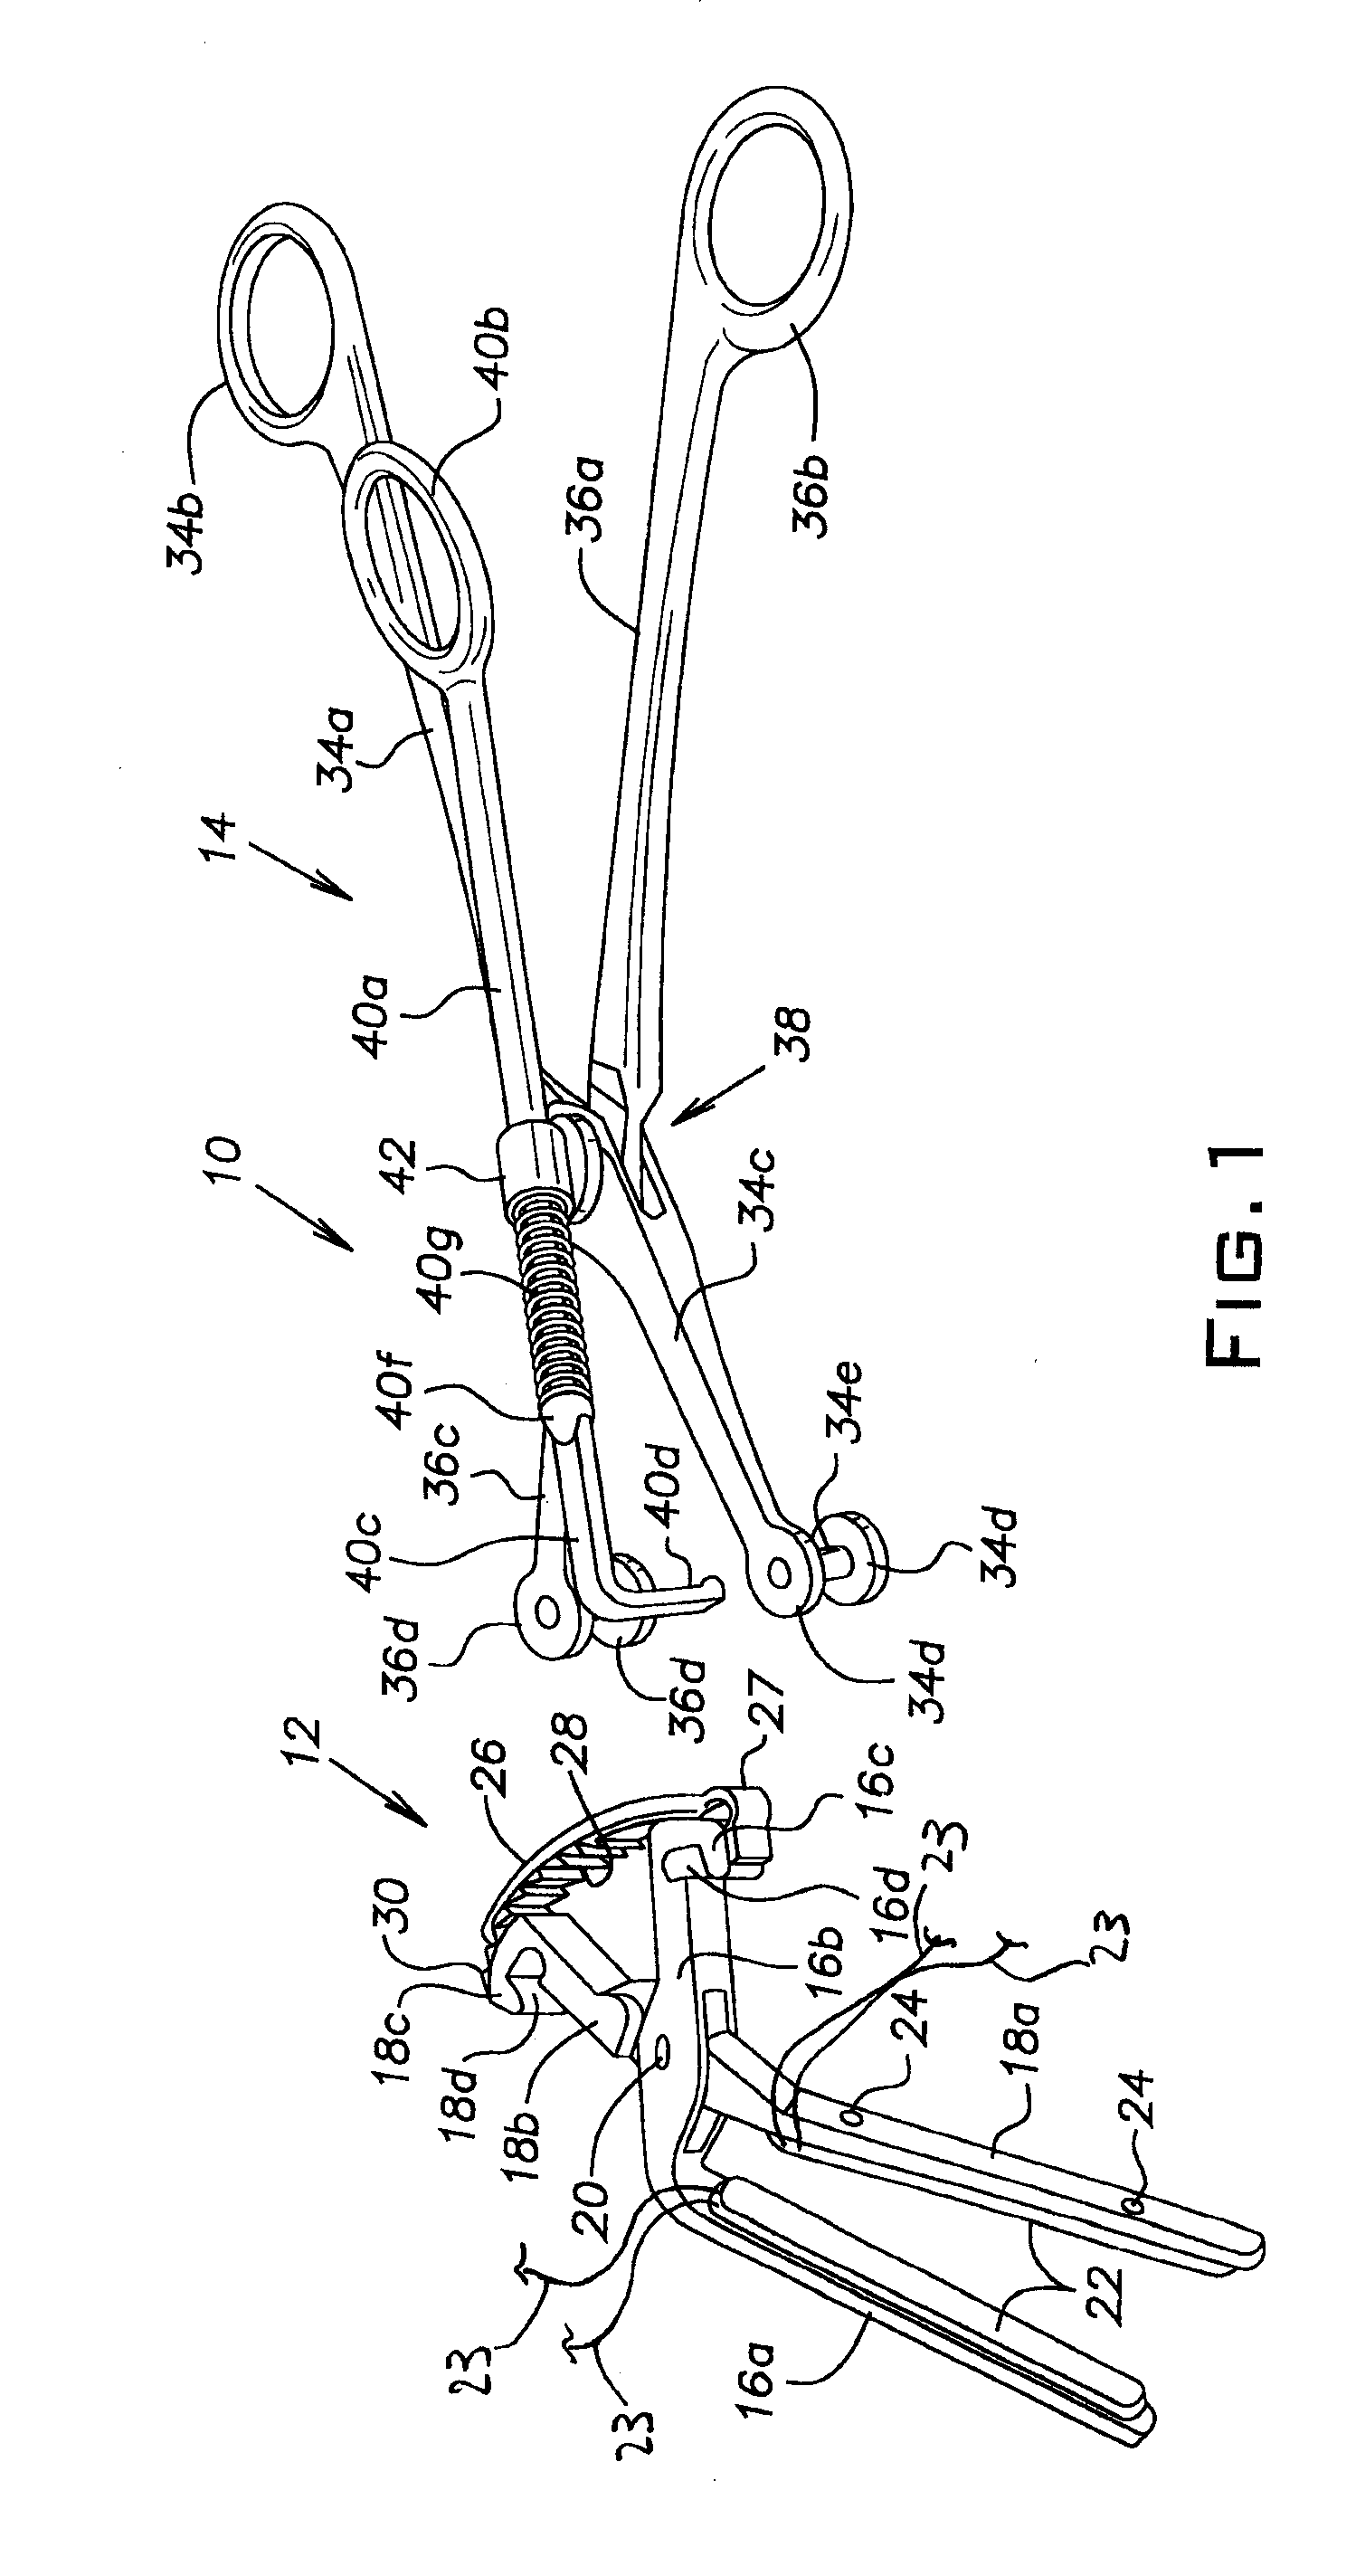 Surgical Clamp Assembly with Electrodes